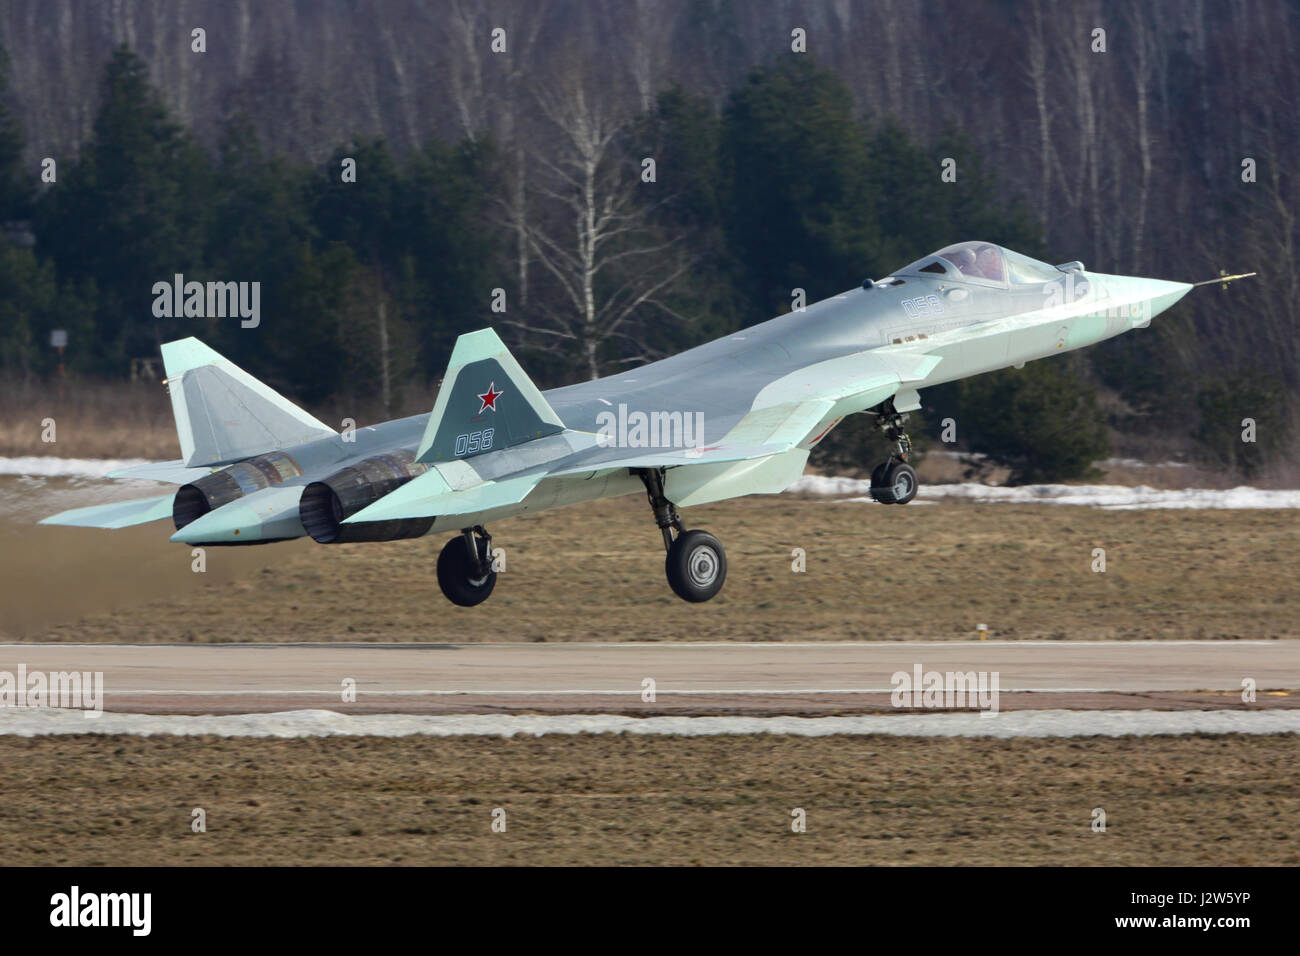 ZHUKOVSKY, MOSCOW REGION, RUSSIA - MARCH 15, 2017: Sukhoi T-50 058 BLUE Russian fifth generation jet fighter taking off for a test flight at Zhukovsky Stock Photo